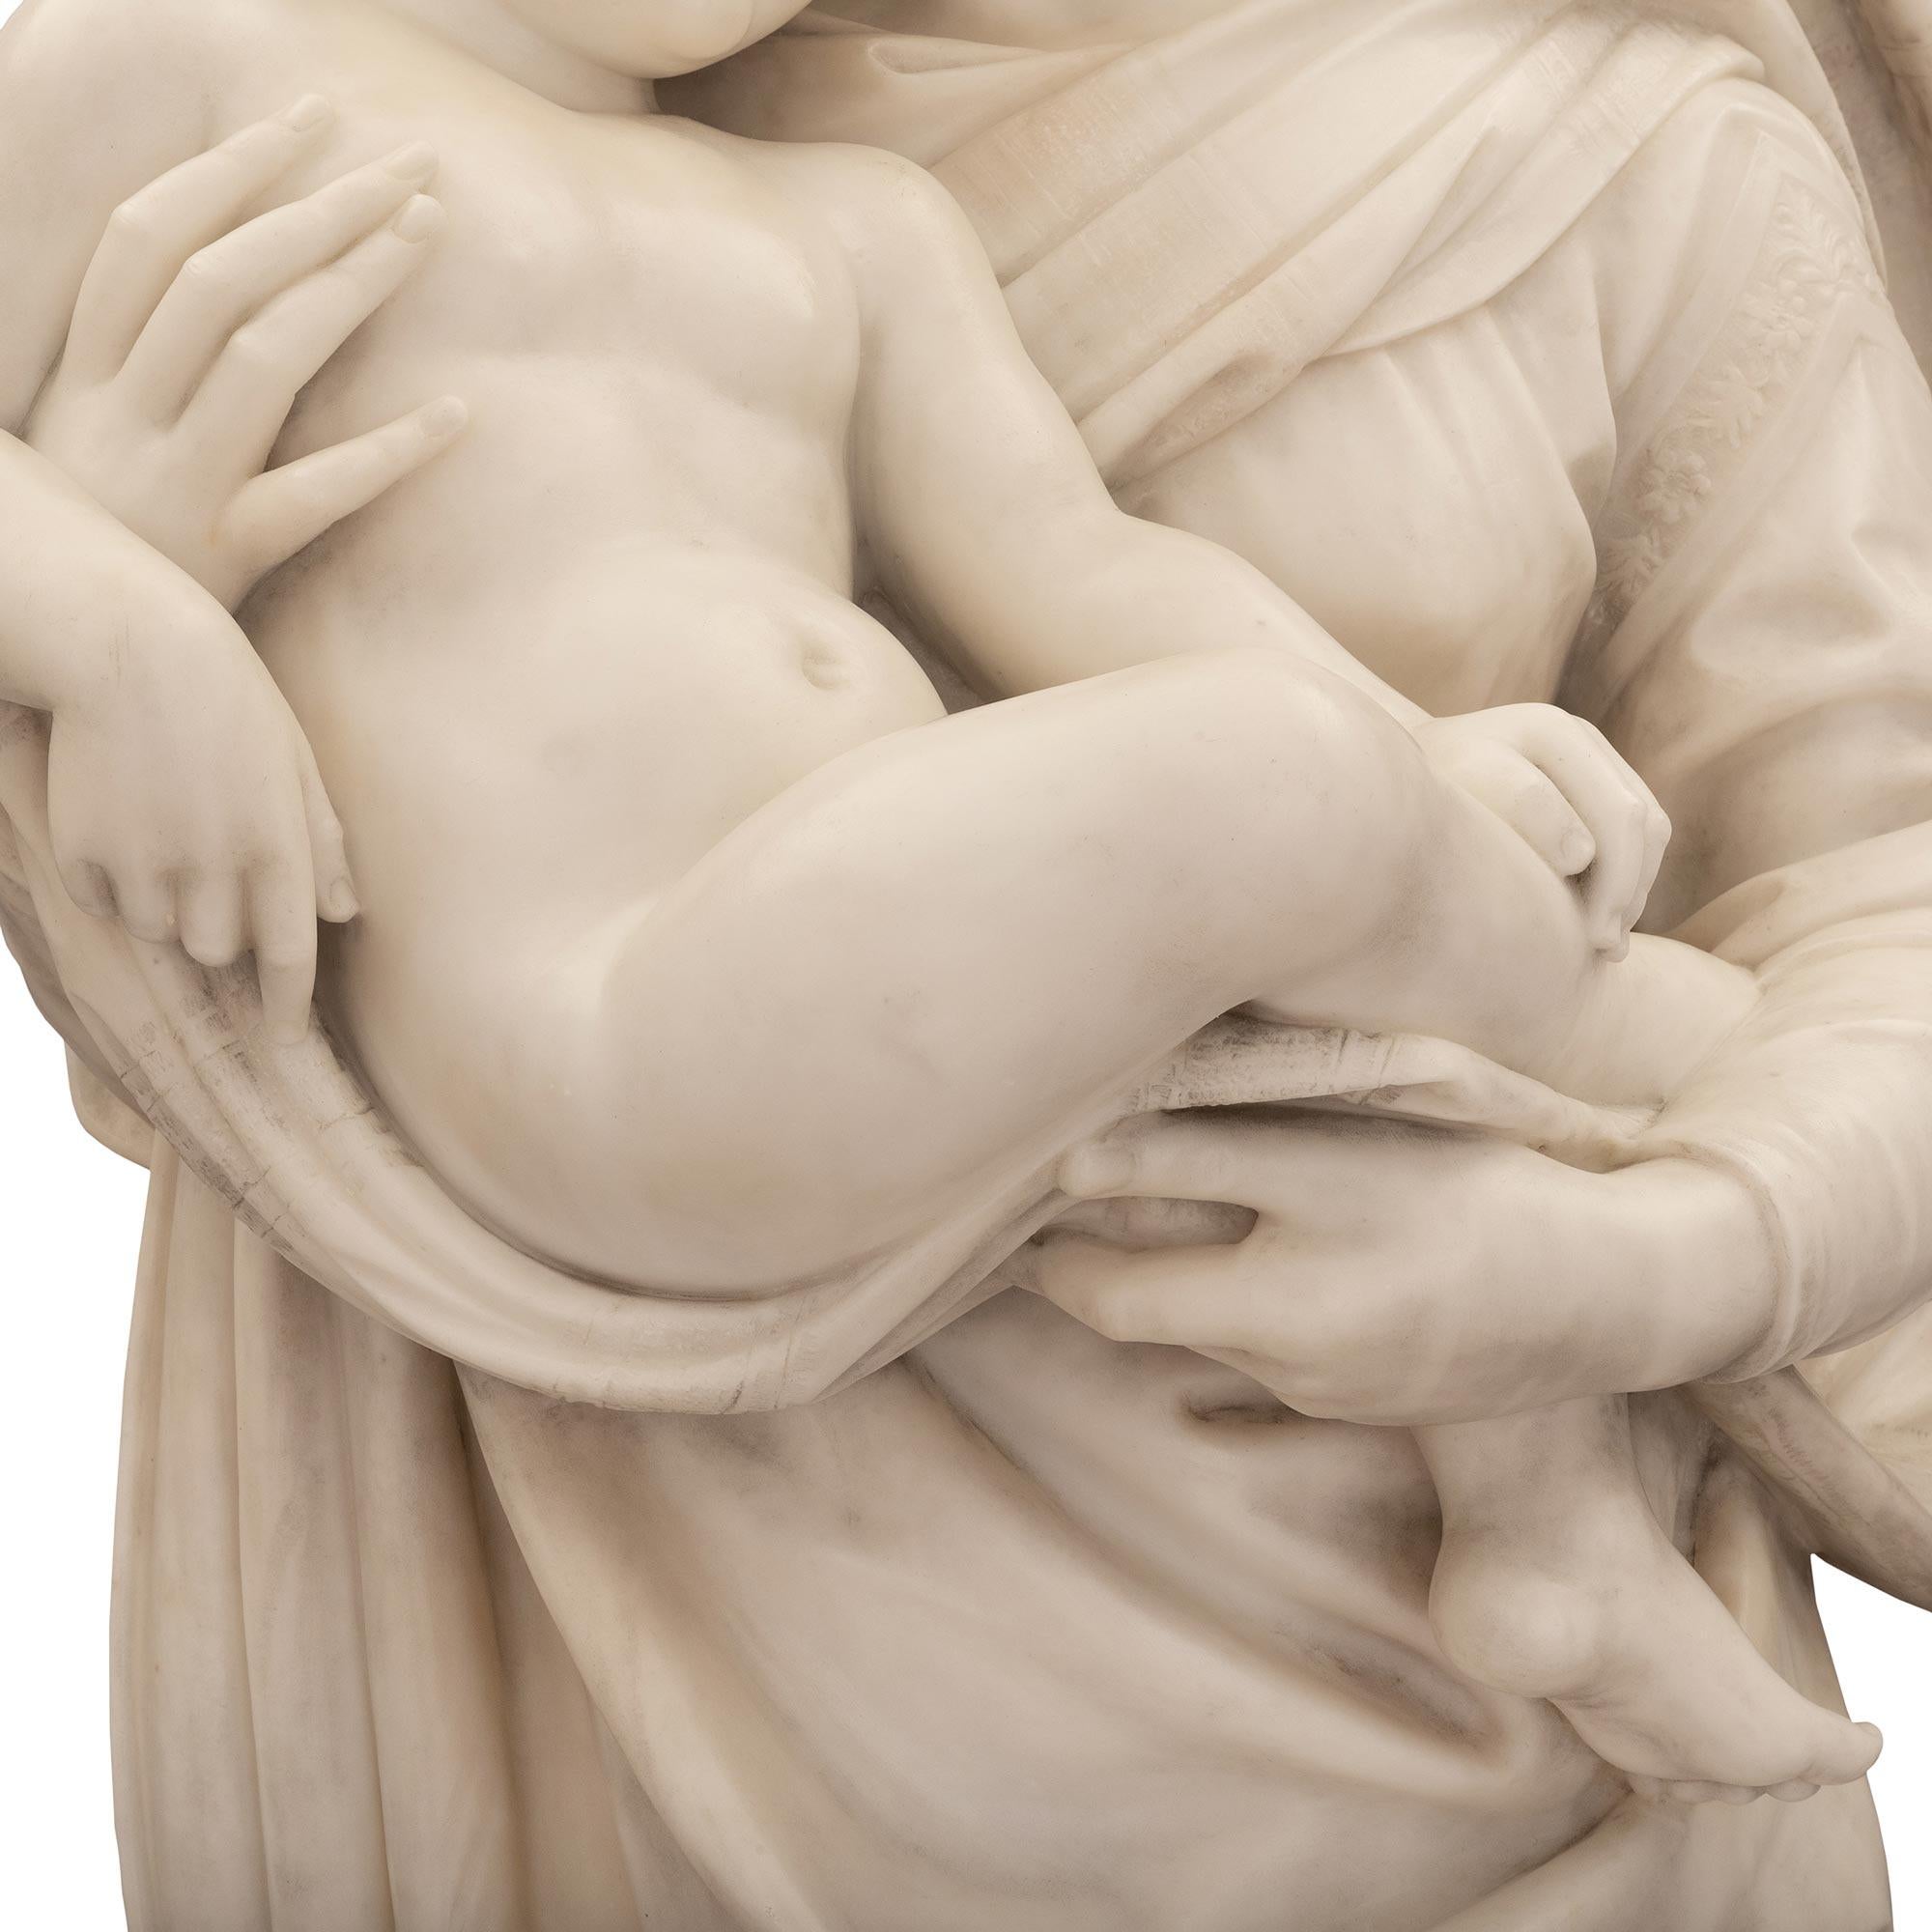 Italian 19th Century White Carrara Marble Life-Size Statue of Madonna and Child For Sale 2